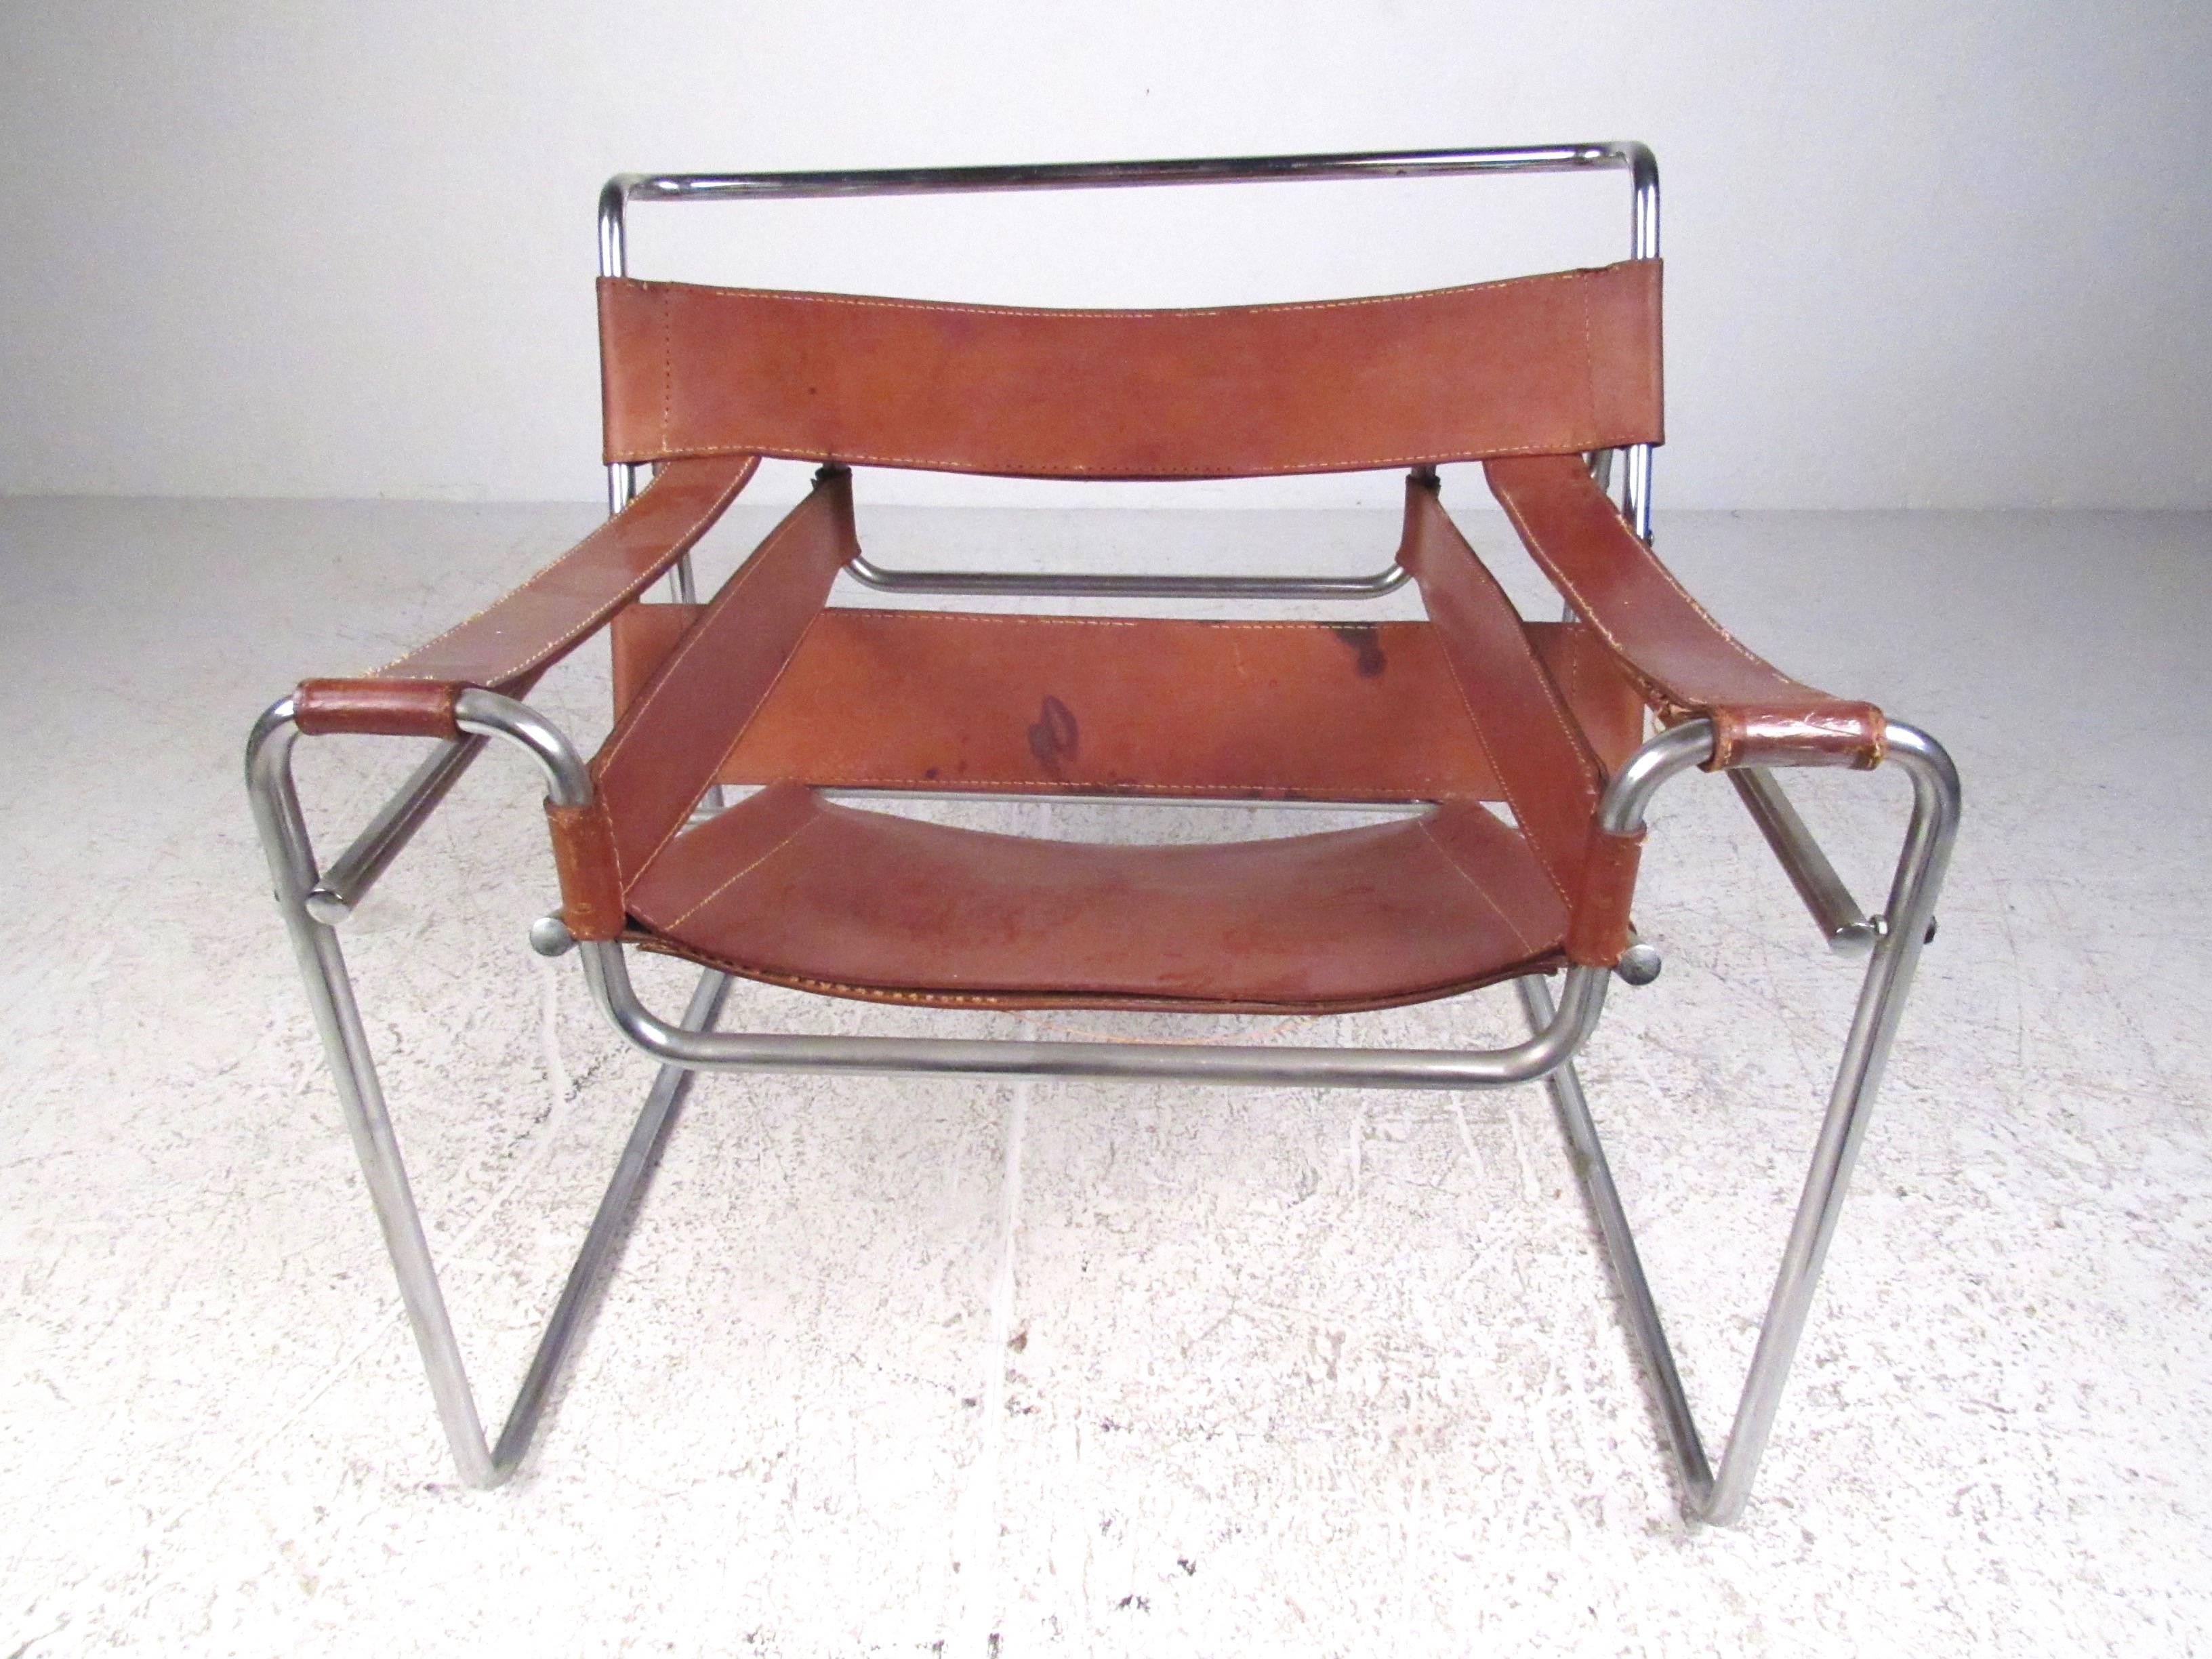 This vintage chrome and leather chair features style similar to Mid-Century Modern design of Marcel Bruer for Knoll, and makes a comfortable and stylish addition to any room. Please confirm item location (NY or NJ.)